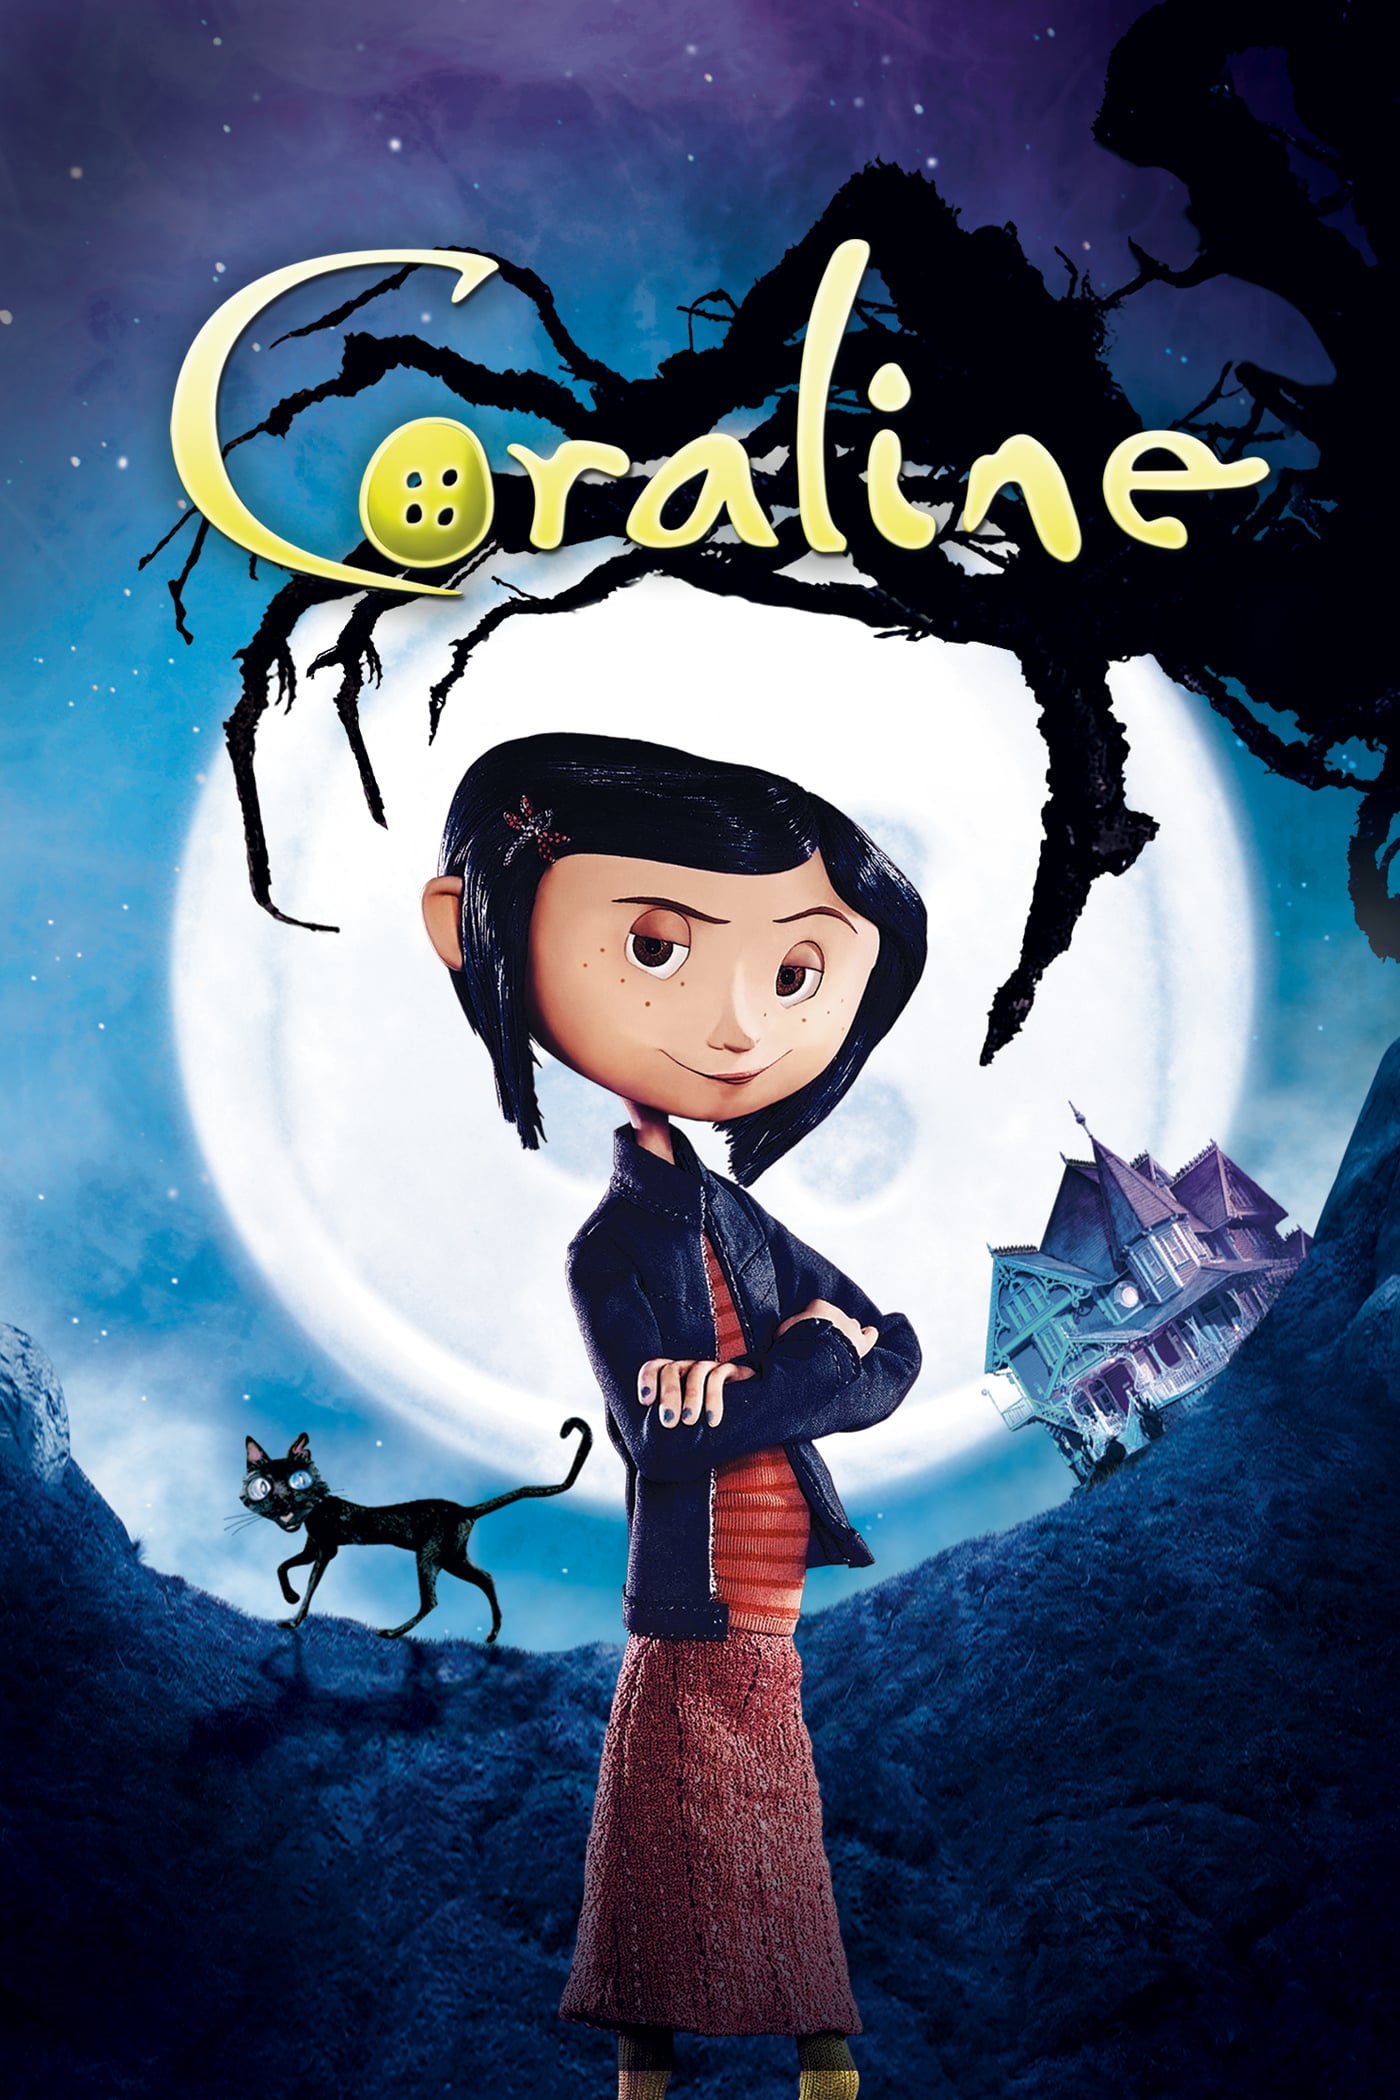 Poster for the movie "Coraline"